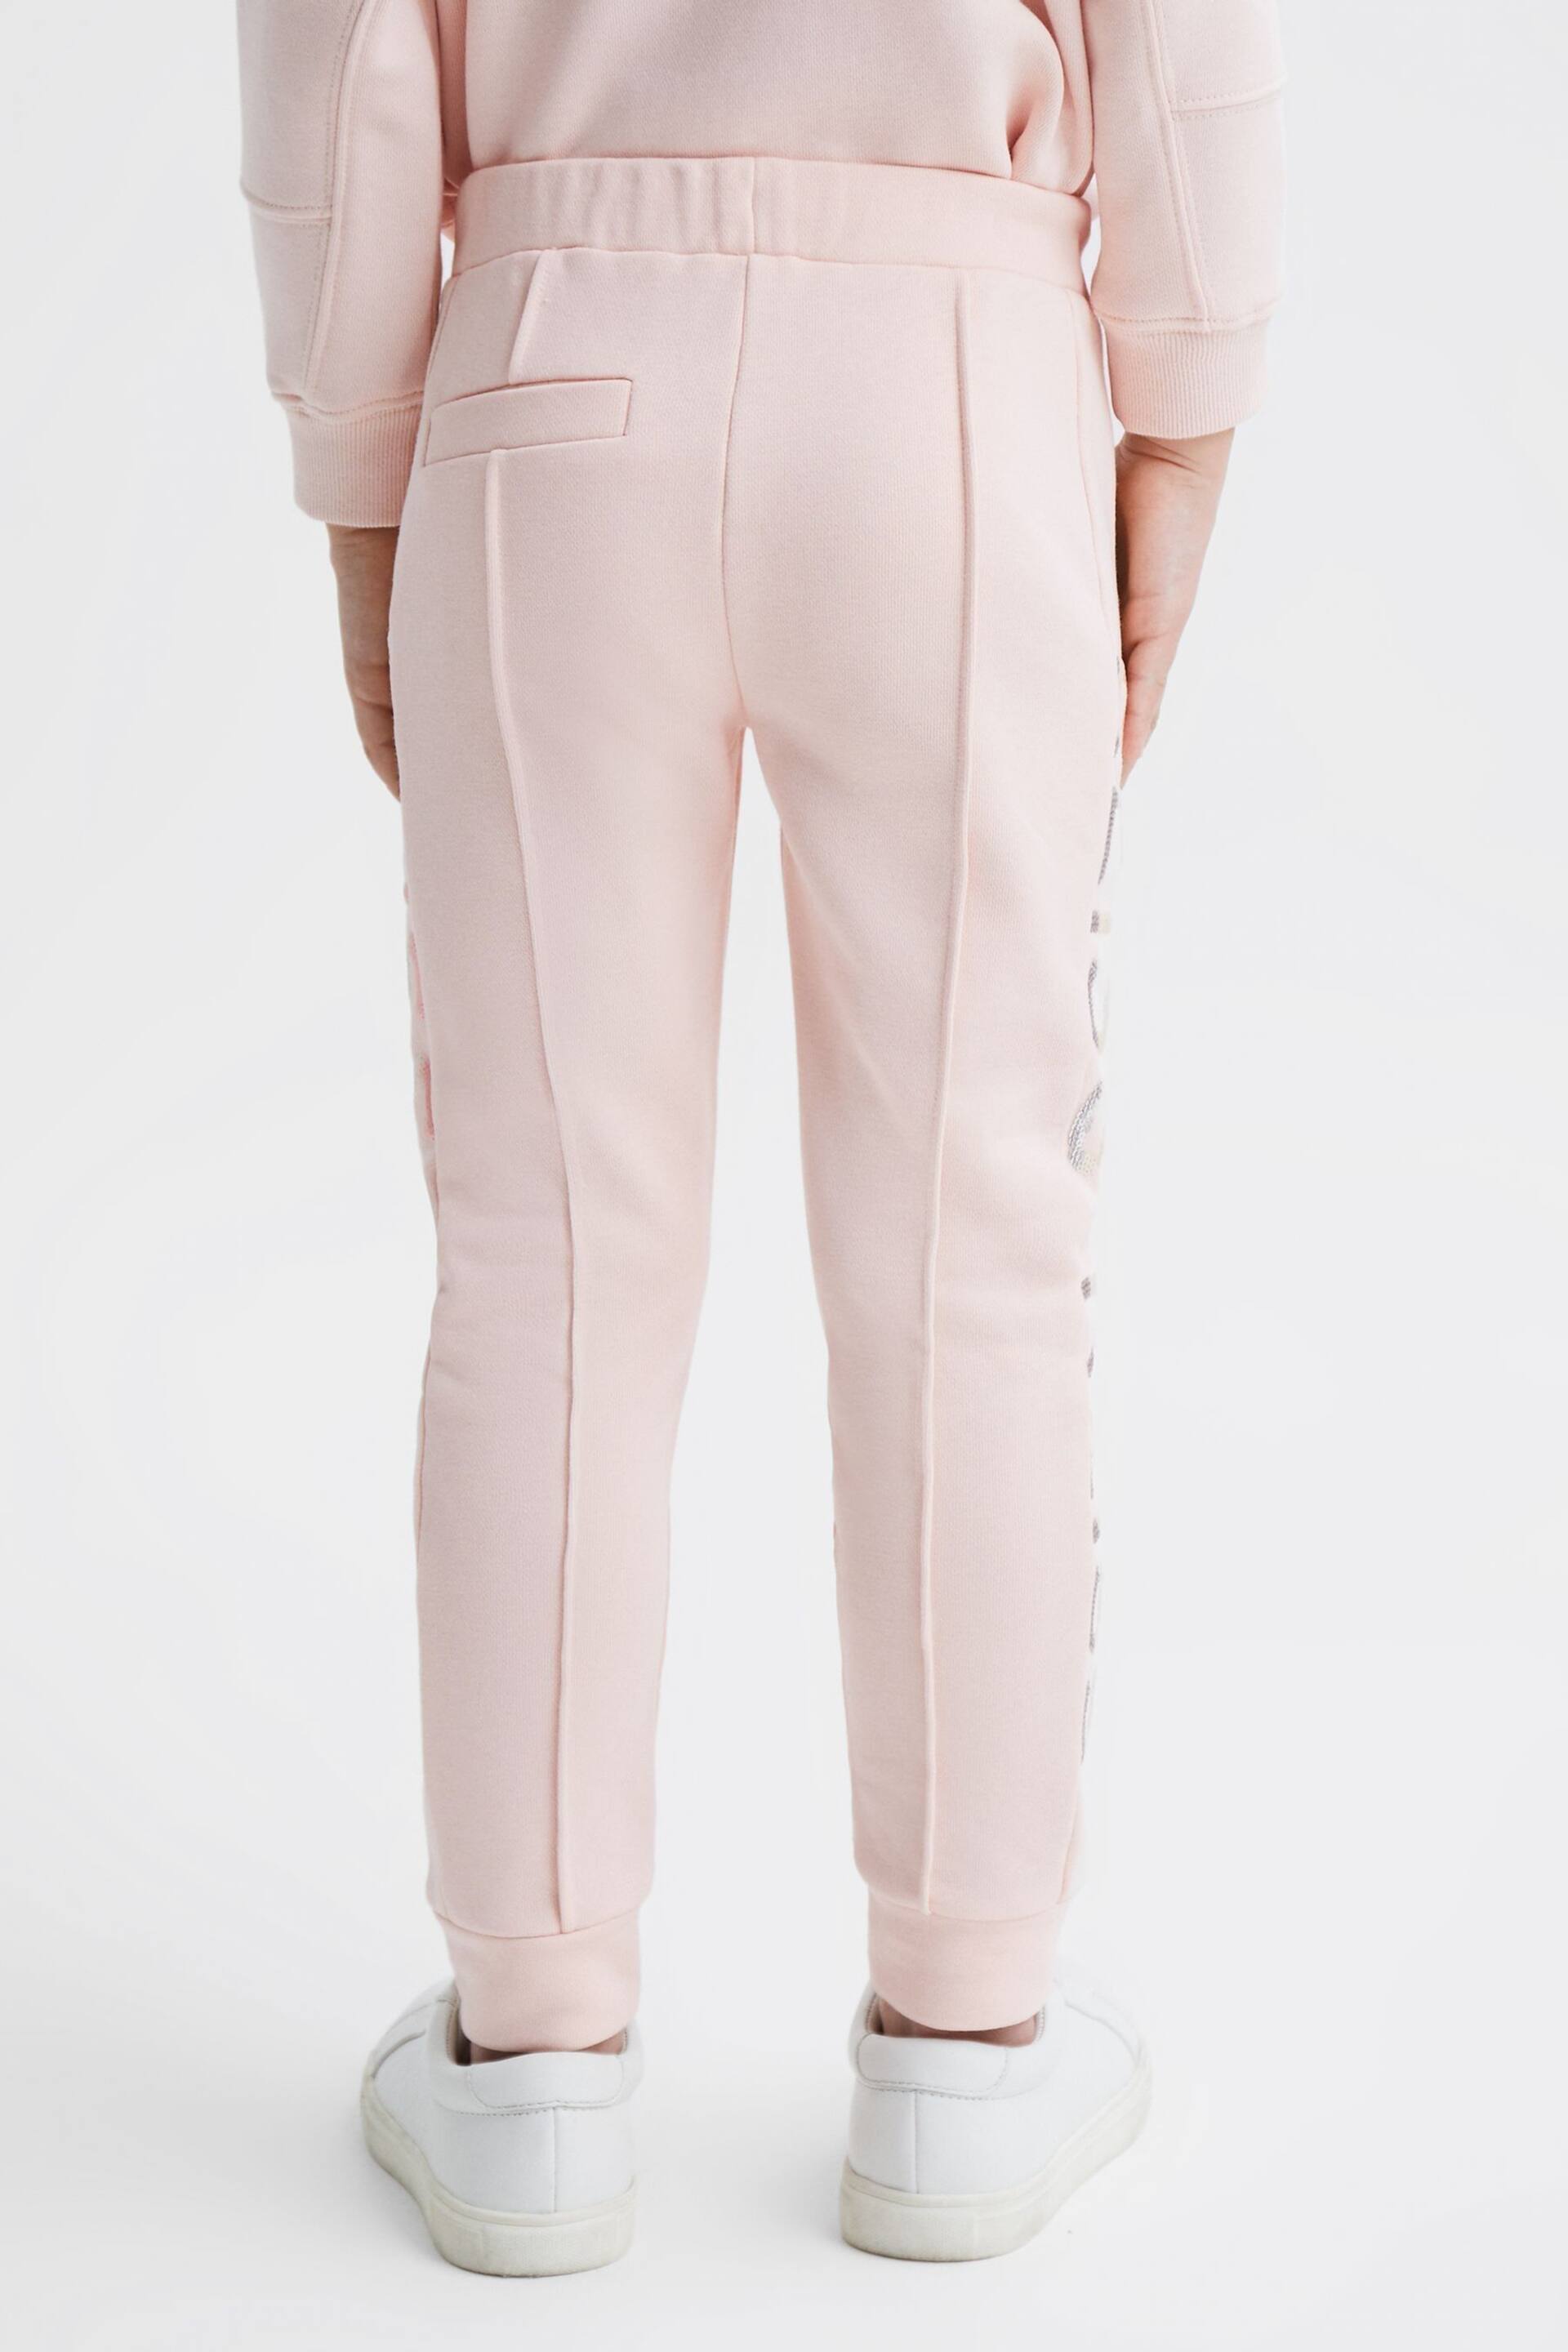 Reiss Soft Pink Maria Senior Sequin Joggers - Image 5 of 6